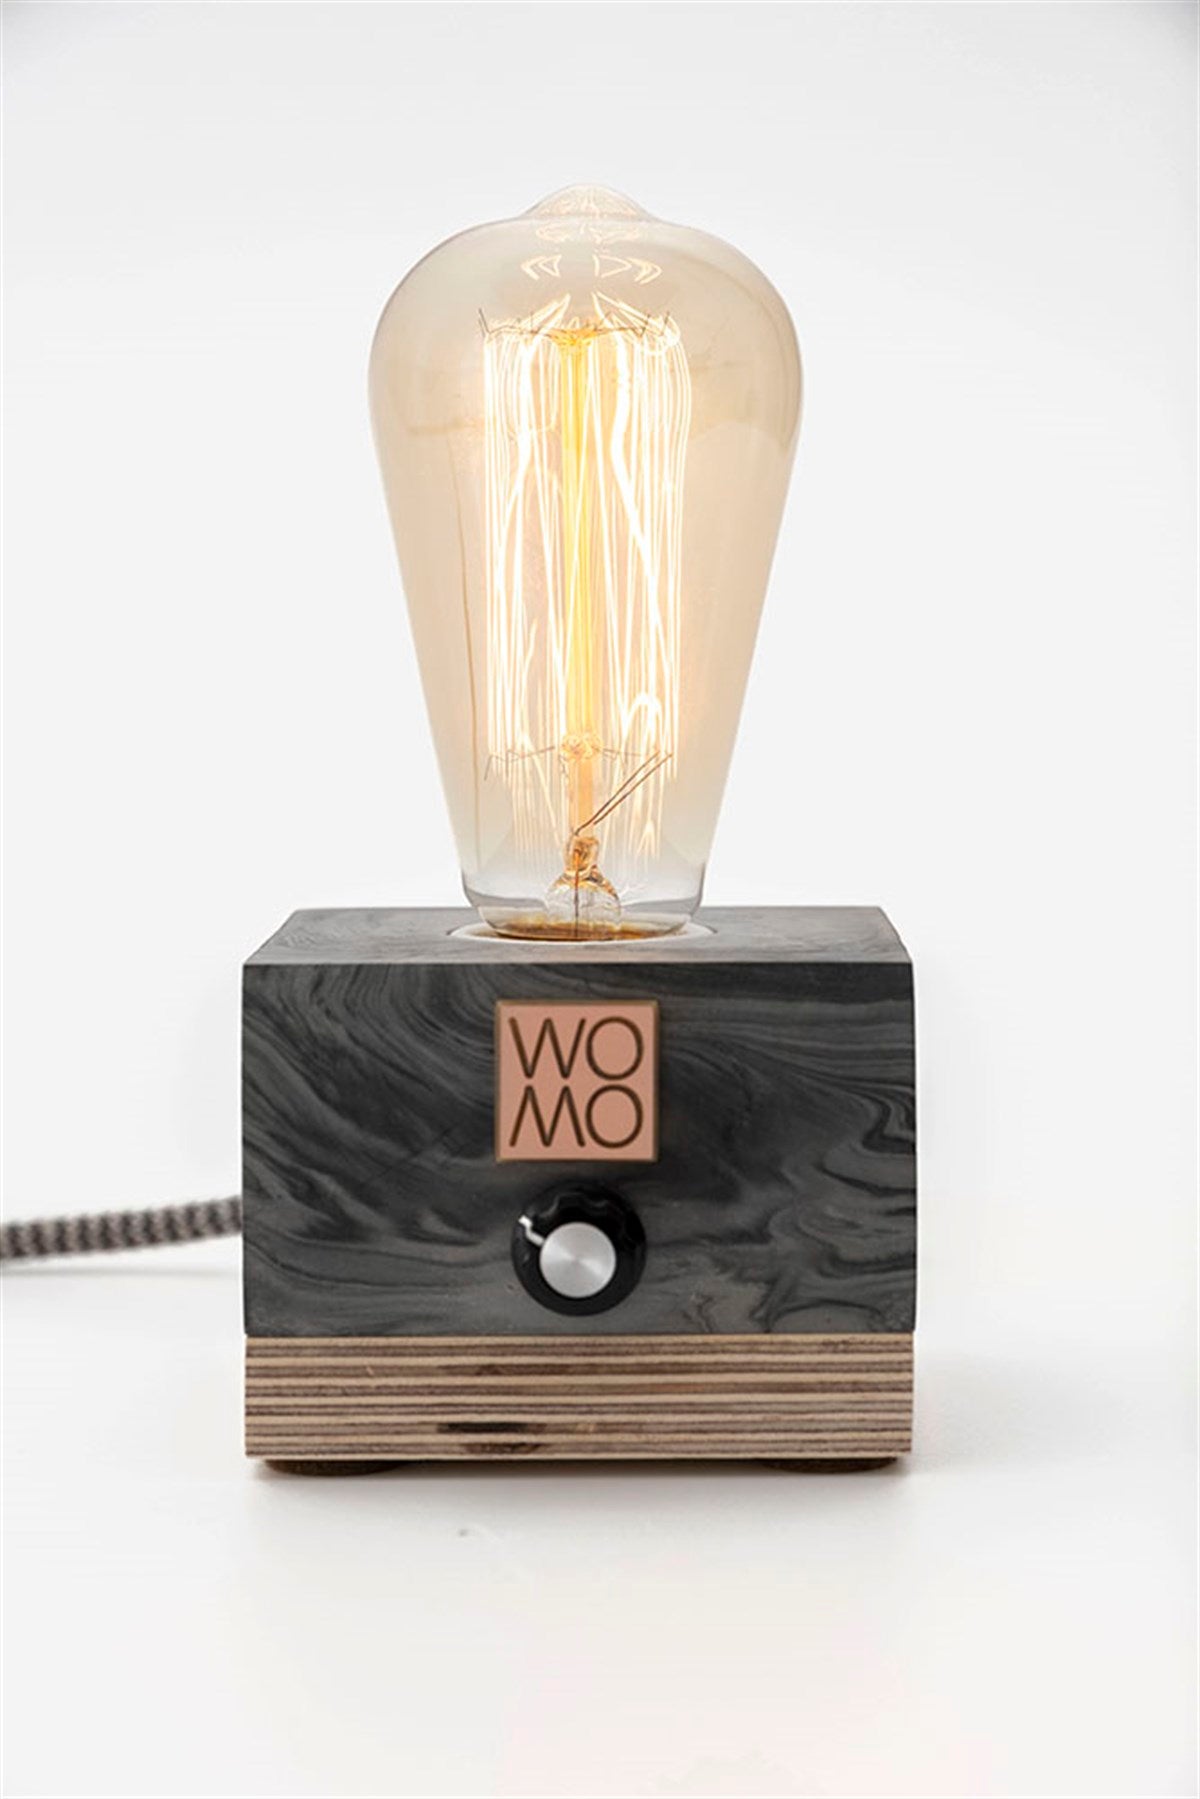 Marble Pattern Concrete Table Lamp with Dimmer - Cylinder